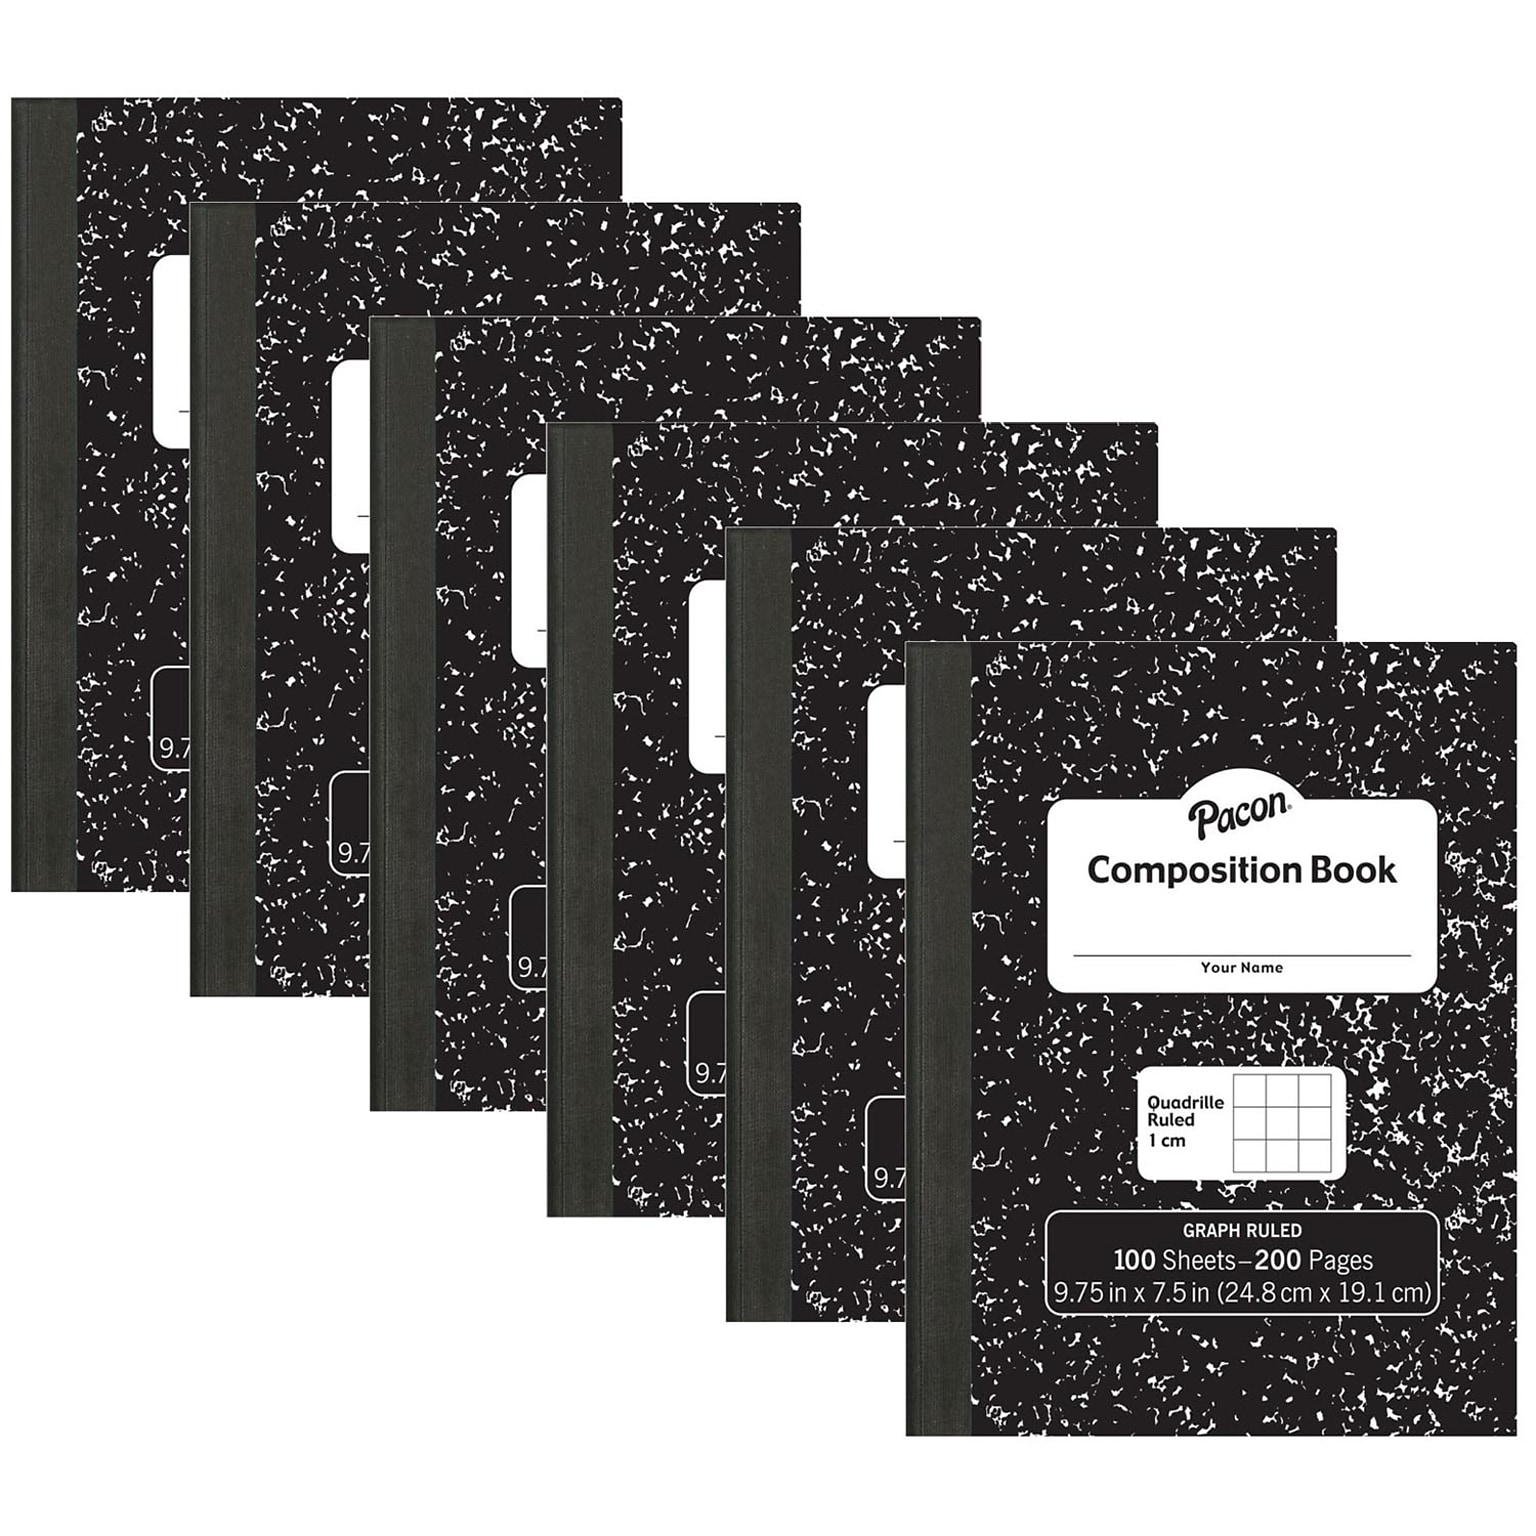 Pacon® Composition Book, 9.75 x 7.5, 1 cm Quadrille Ruled, 100 Sheets, Black Marble, Pack of 6 (PACMMK37105-6)